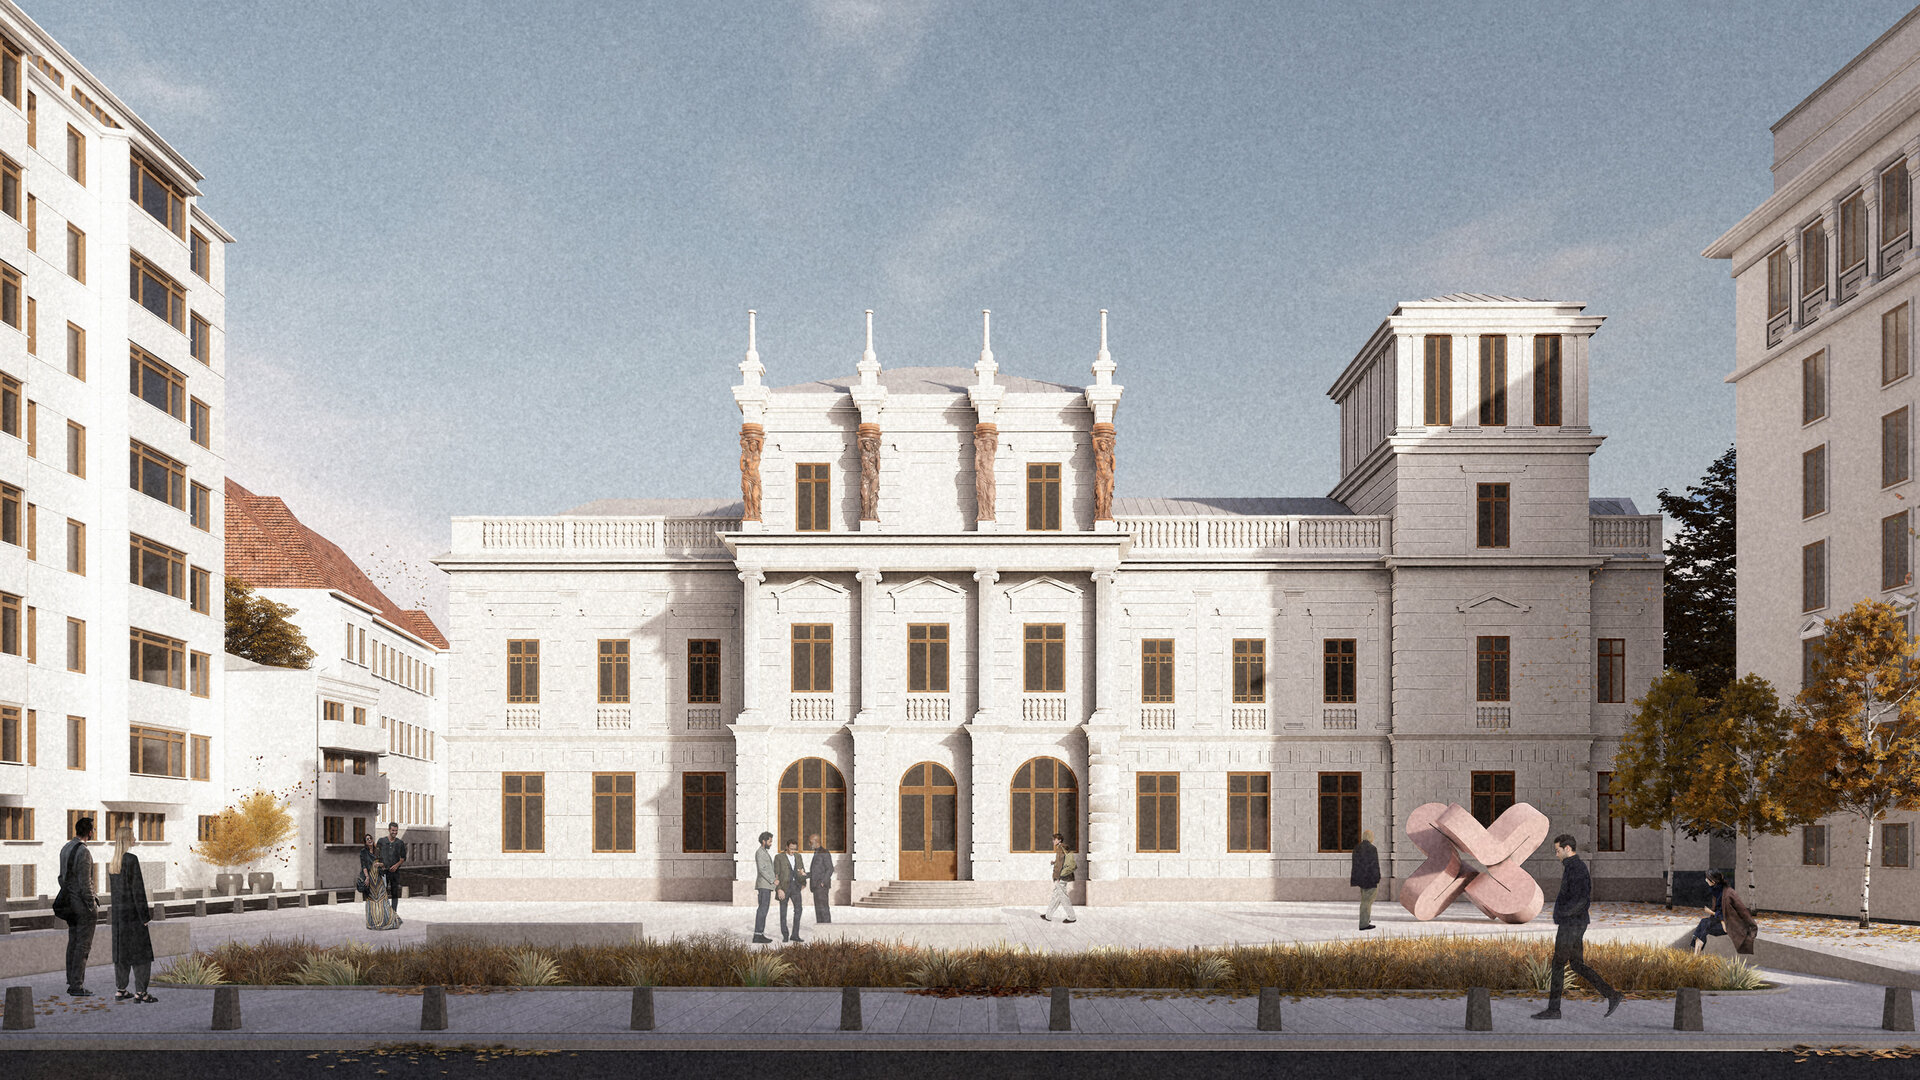 The rehabilitation and extension of the Știrbei Palace in Bucharest. Relocation of the National Museum of Contemporary Art